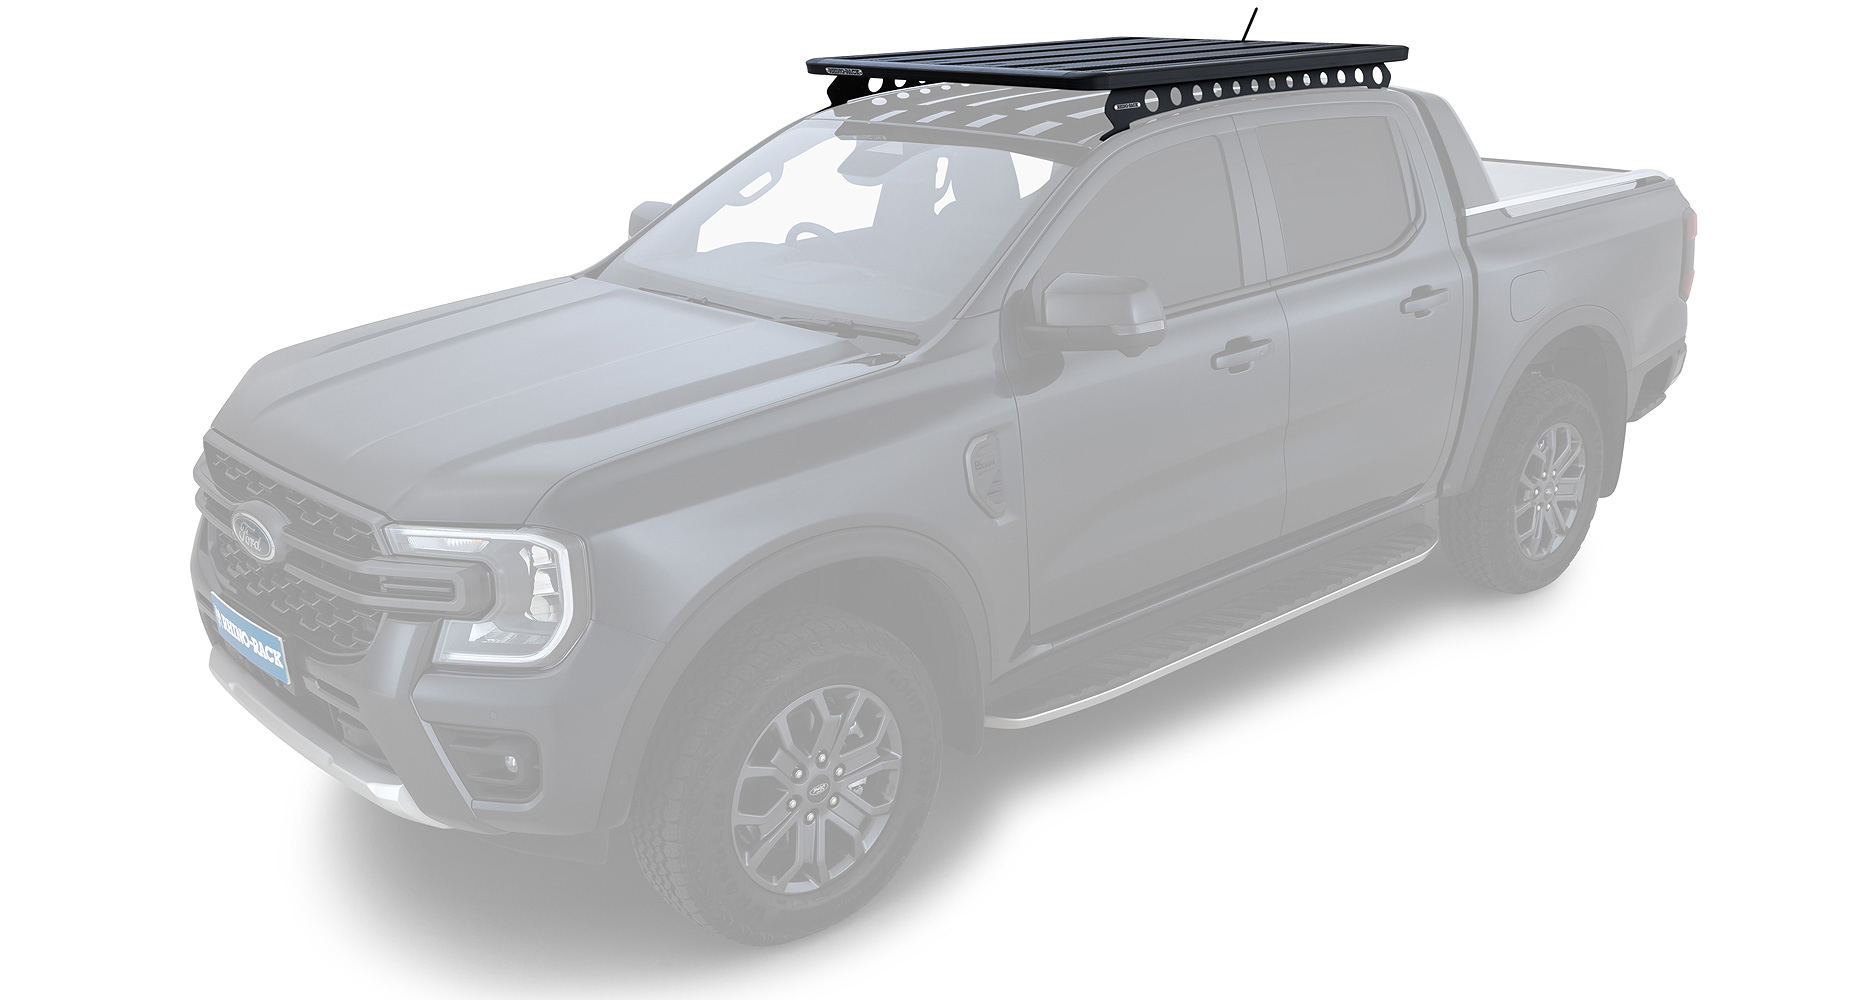 Rhino Rack JC-01542 Pioneer Platform (1528mm x 1236mm) with Backbone for Ford Ranger P703 4dr Ute with Bare Roof (2022 onwards) - Factory Point Mount